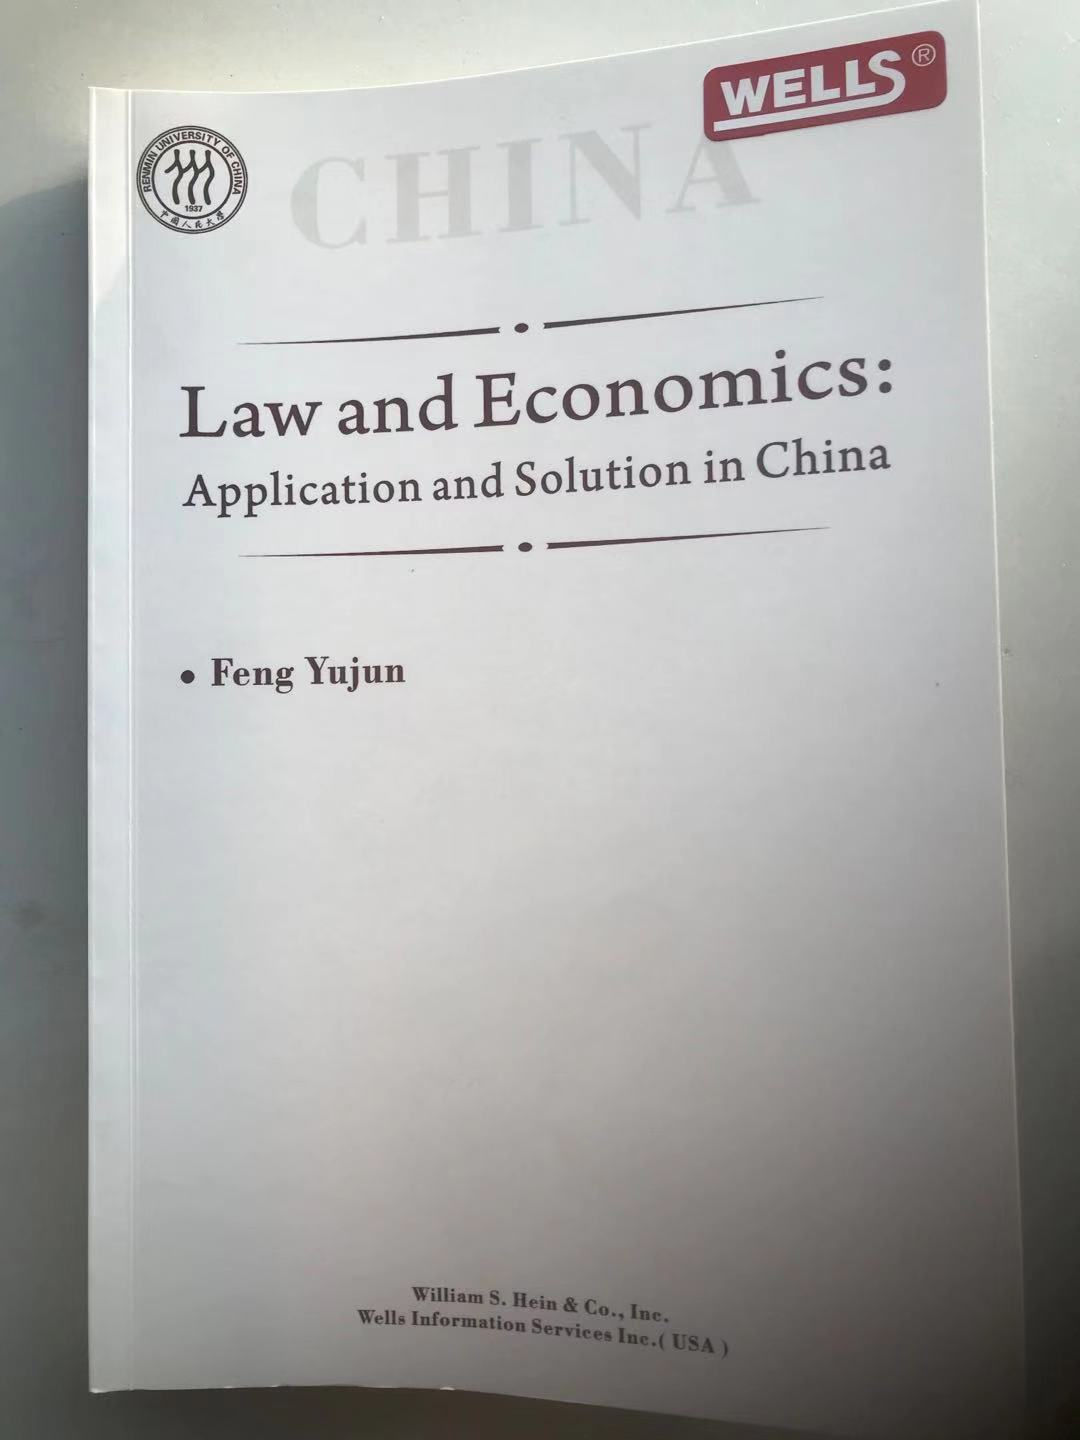 law and economics cover 20200119161058.jpg